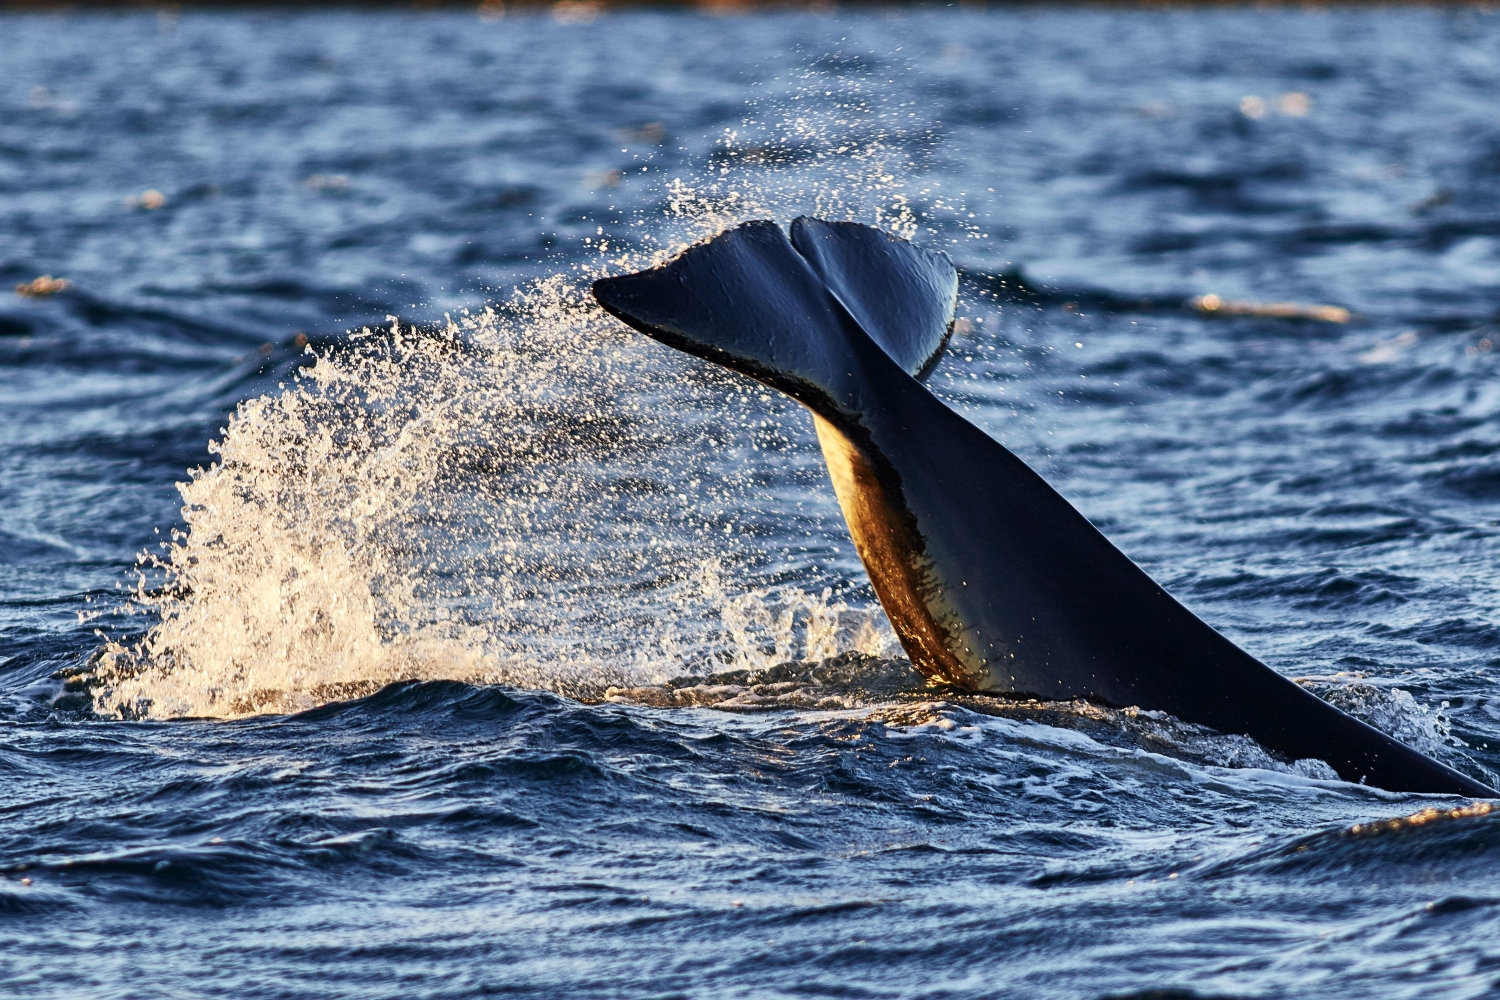 Tail fin of a whale coming up from the sea